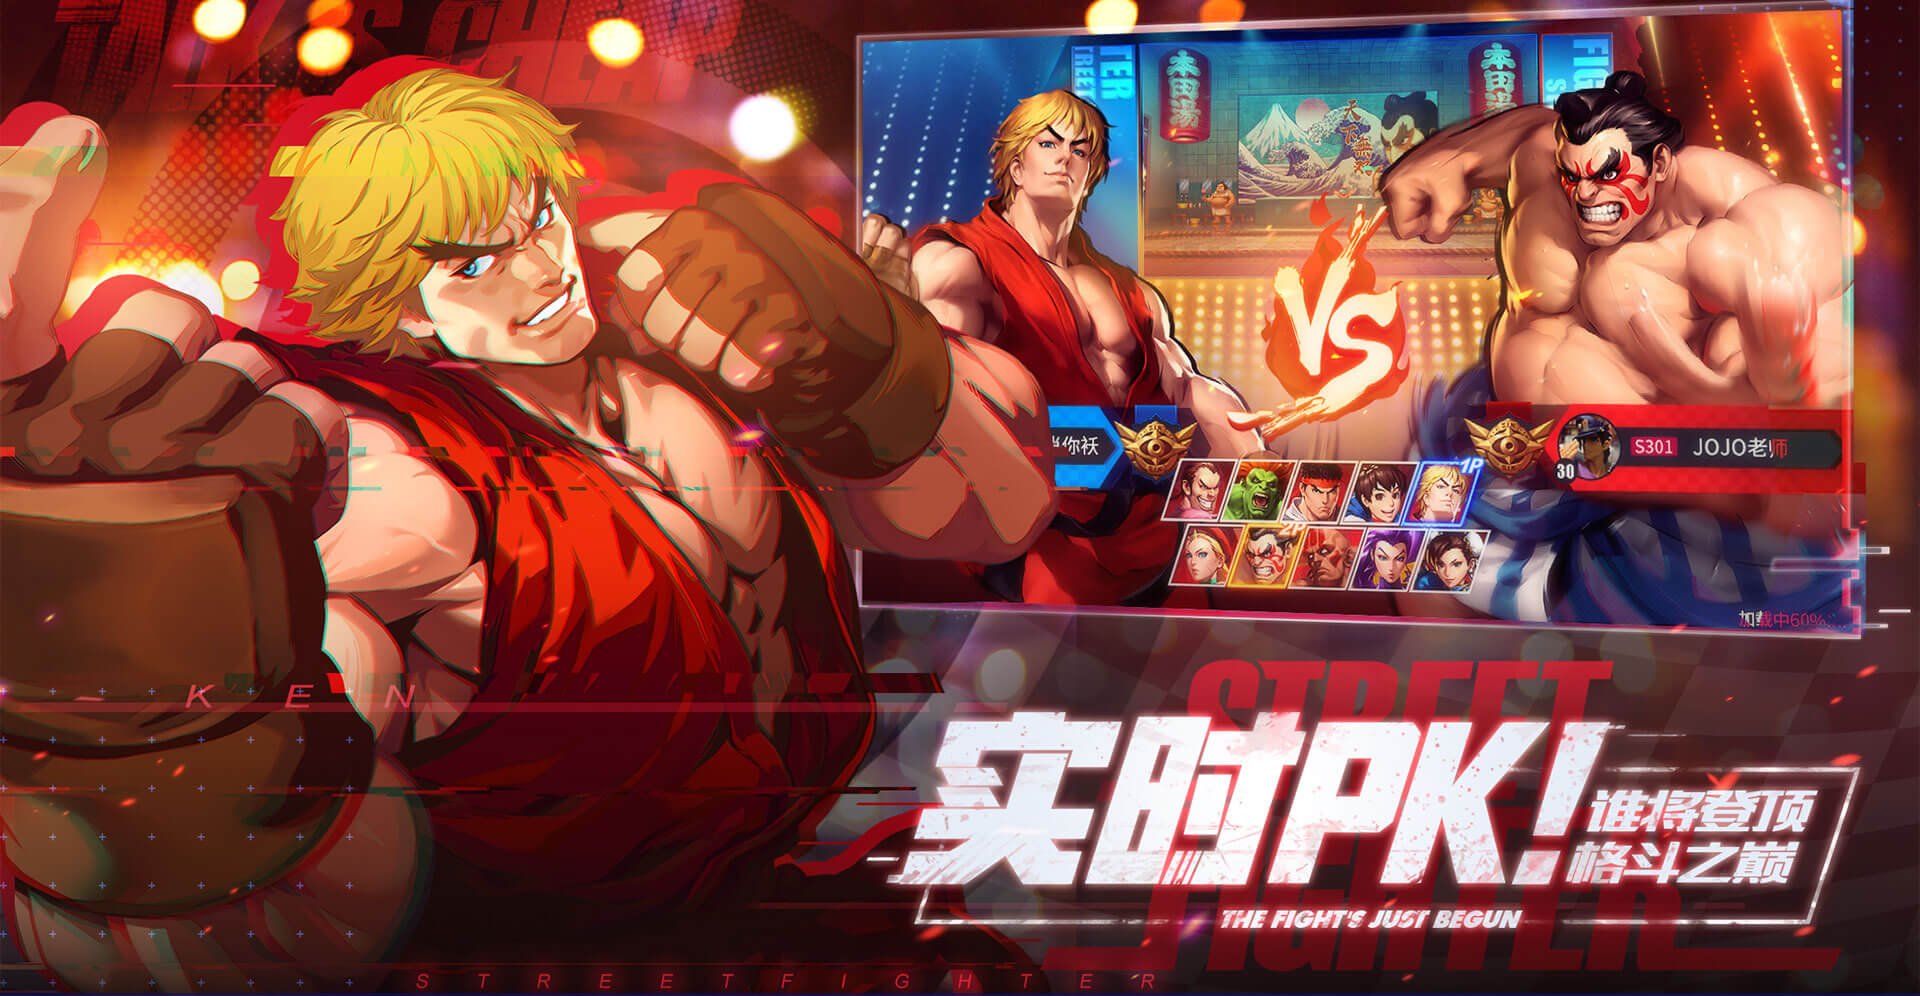 Street Fighter: Duel - Tencent Games launches new mobile title based on  popular Capcom IP - MMO Culture